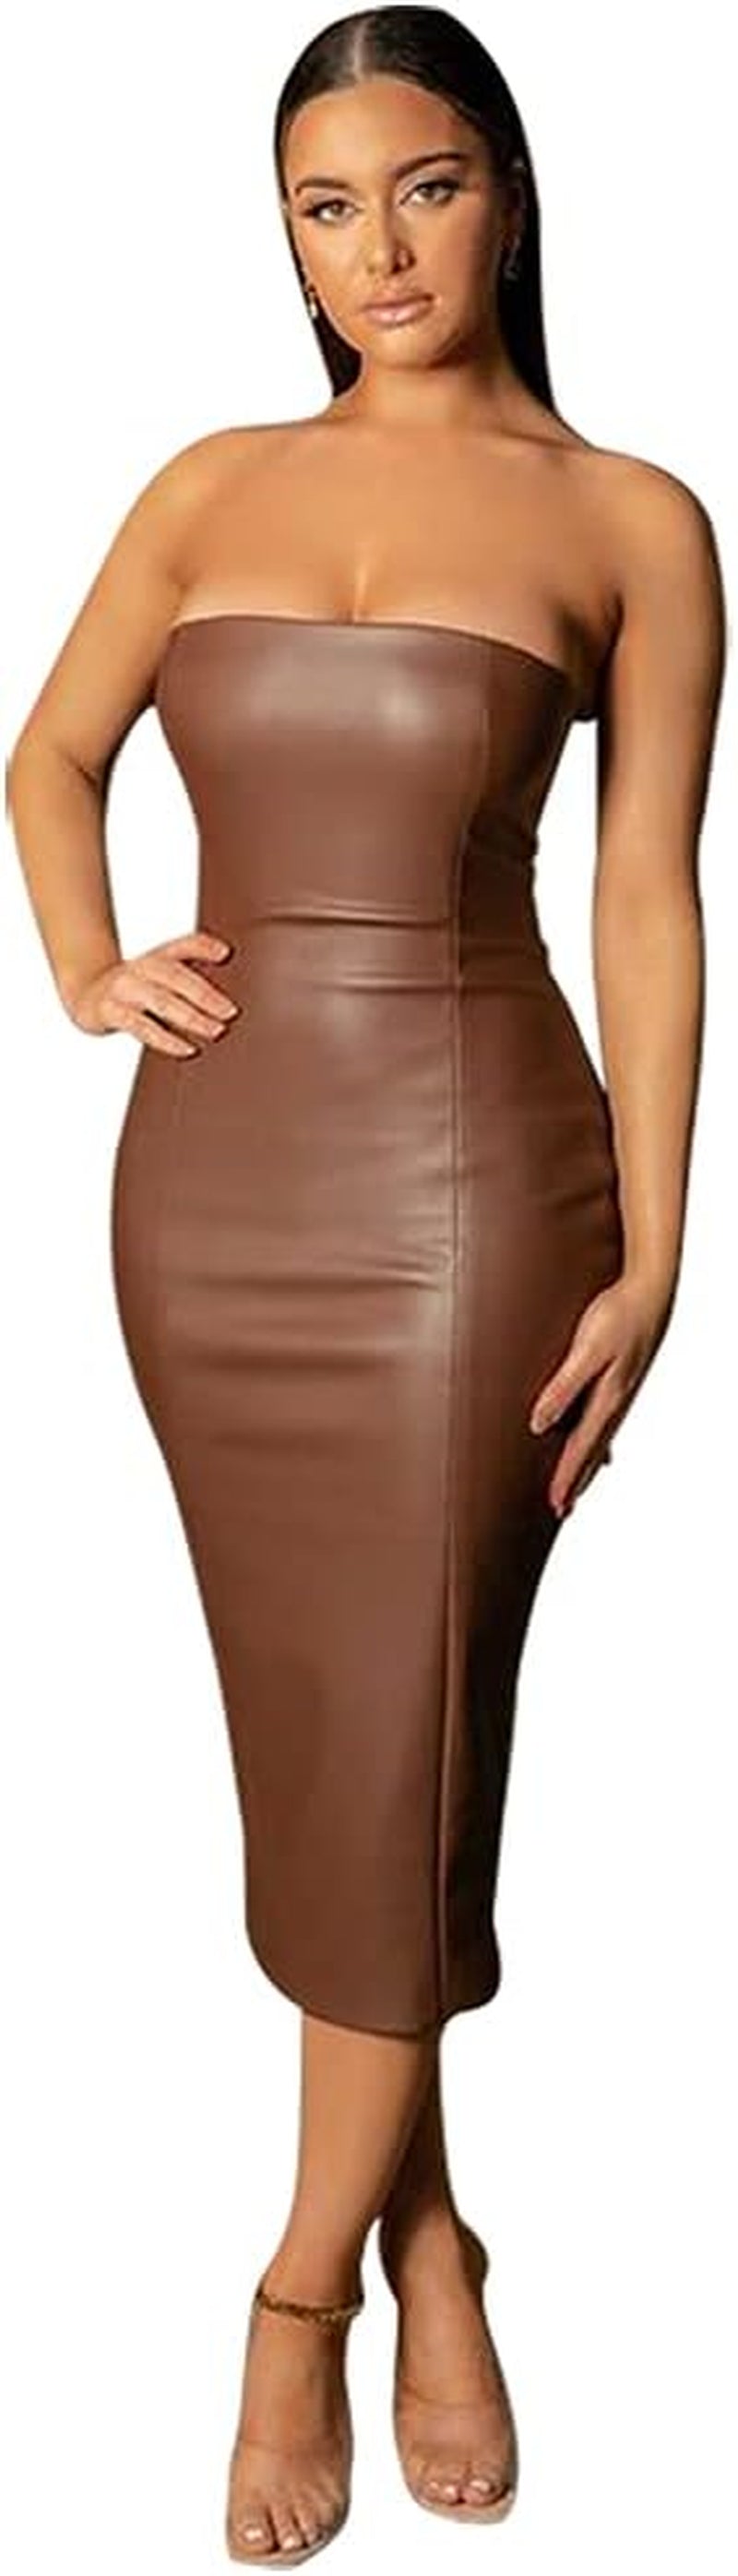 Strapless Tube Top Dress off Shoulder  Faux Leather Dress